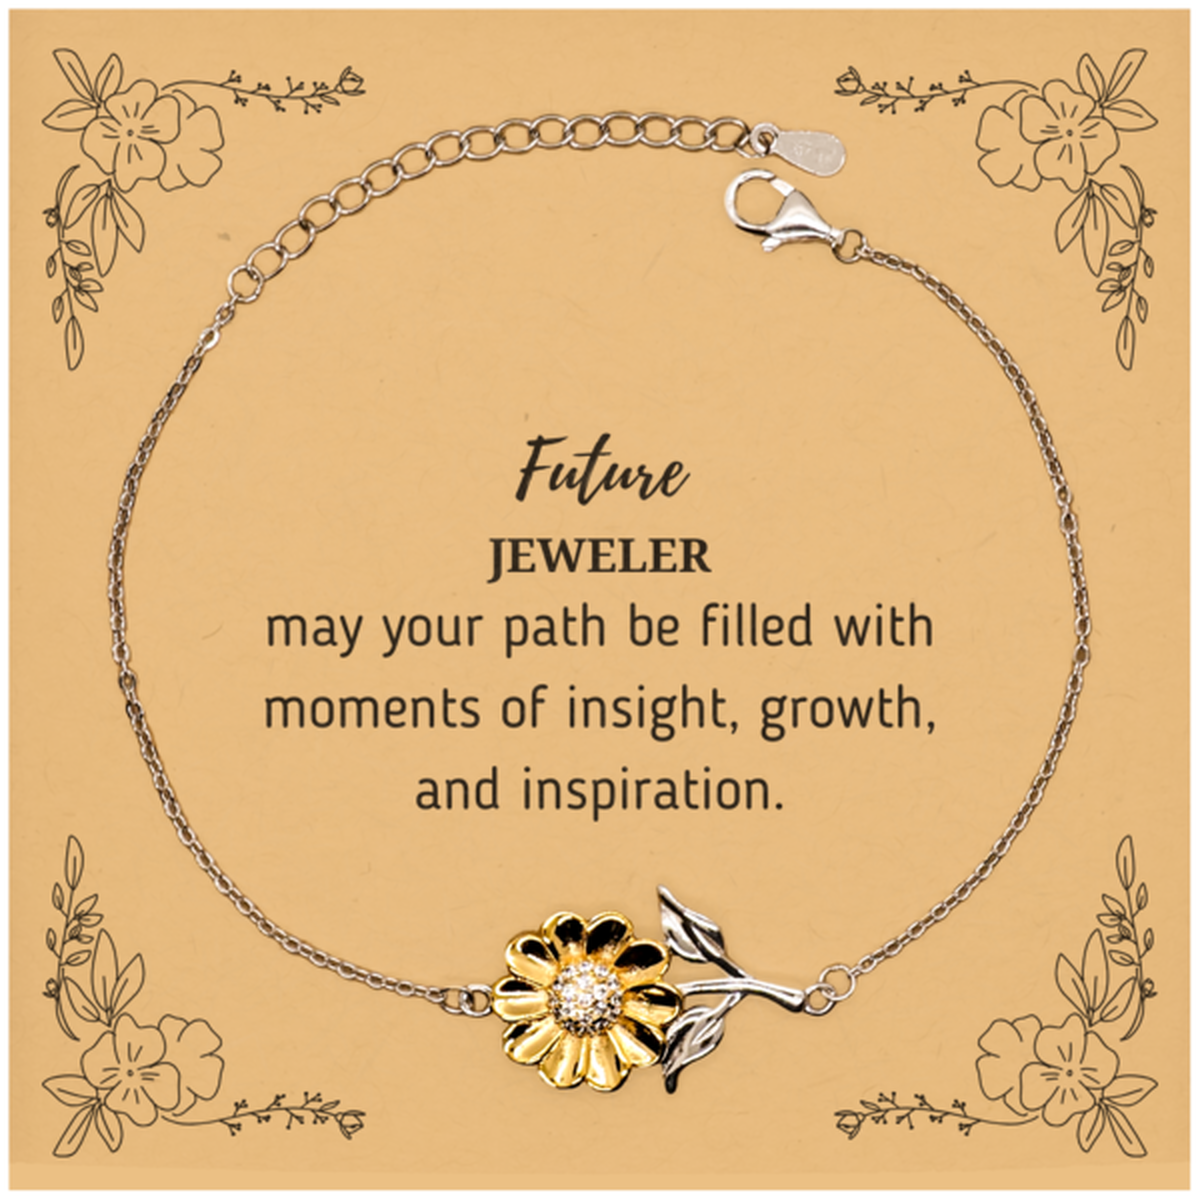 Future Jeweler Gifts, May your path be filled with moments of insight, Graduation Gifts for New Jeweler, Christmas Unique Sunflower Bracelet For Men, Women, Friends